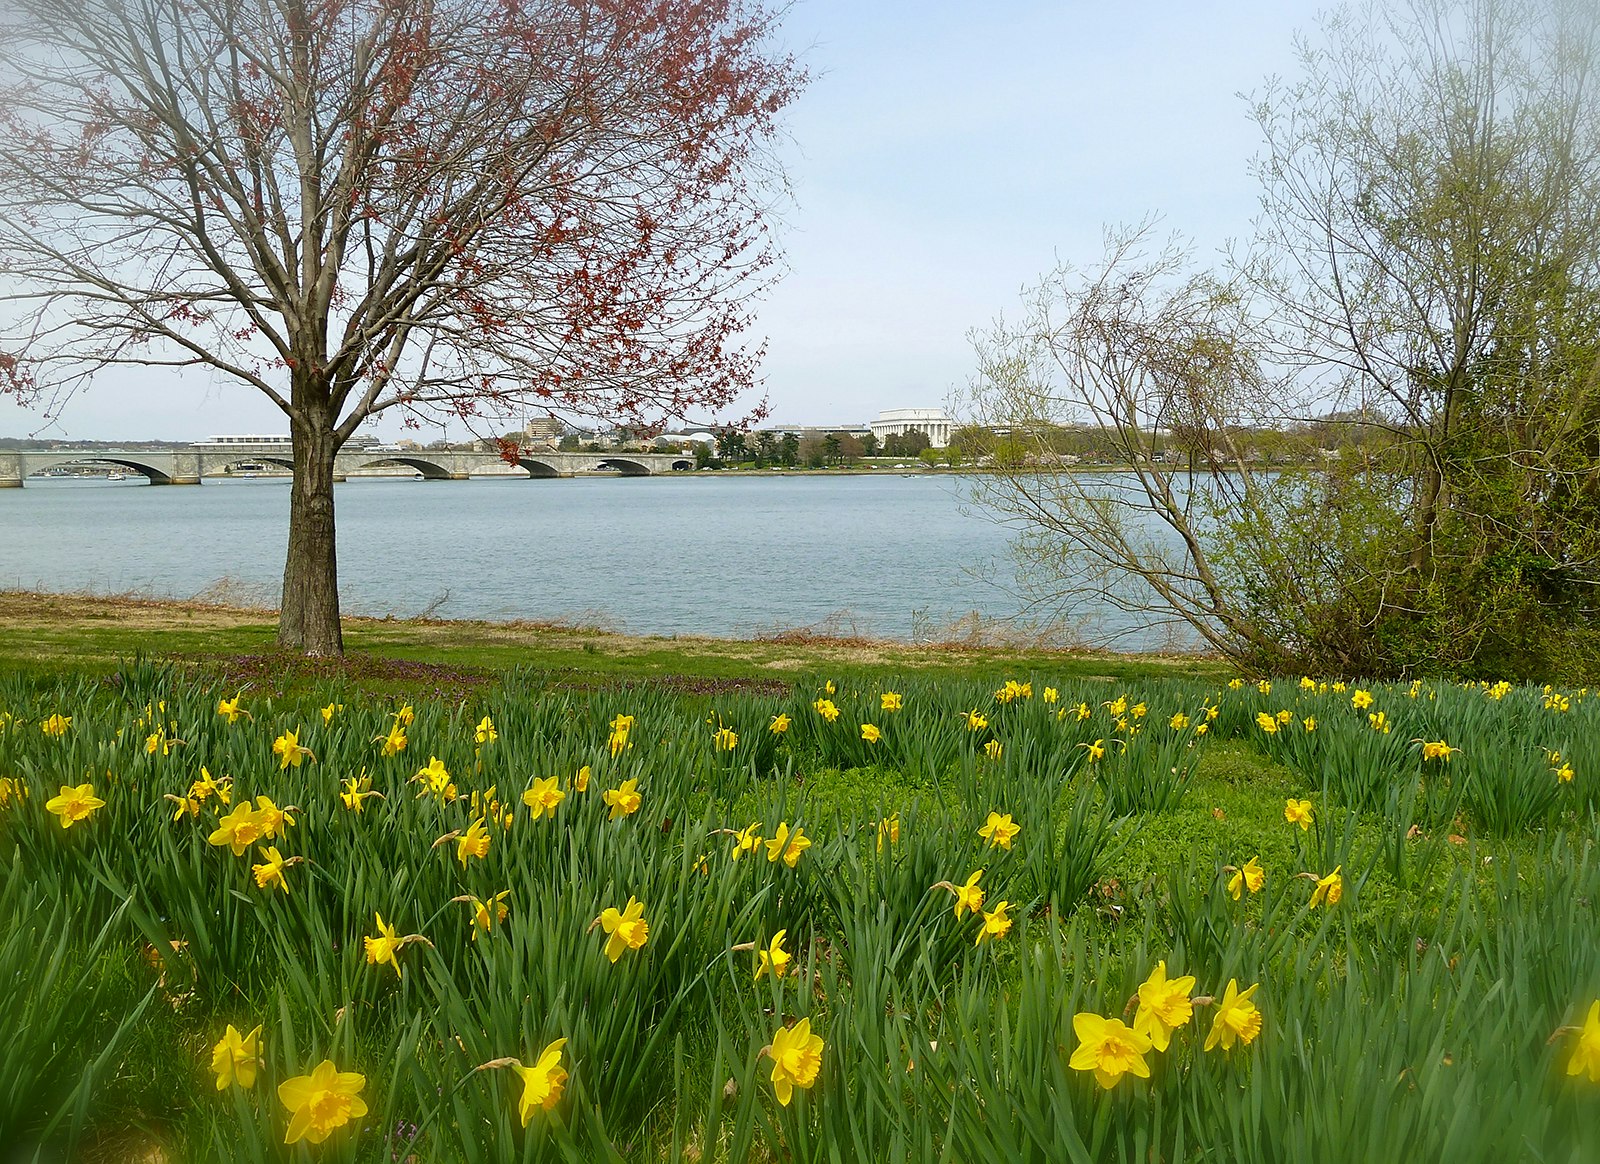 Spring flowers, budding trees and green grass frame some of DC's most iconic sights during a drive along the George Washington Parkway